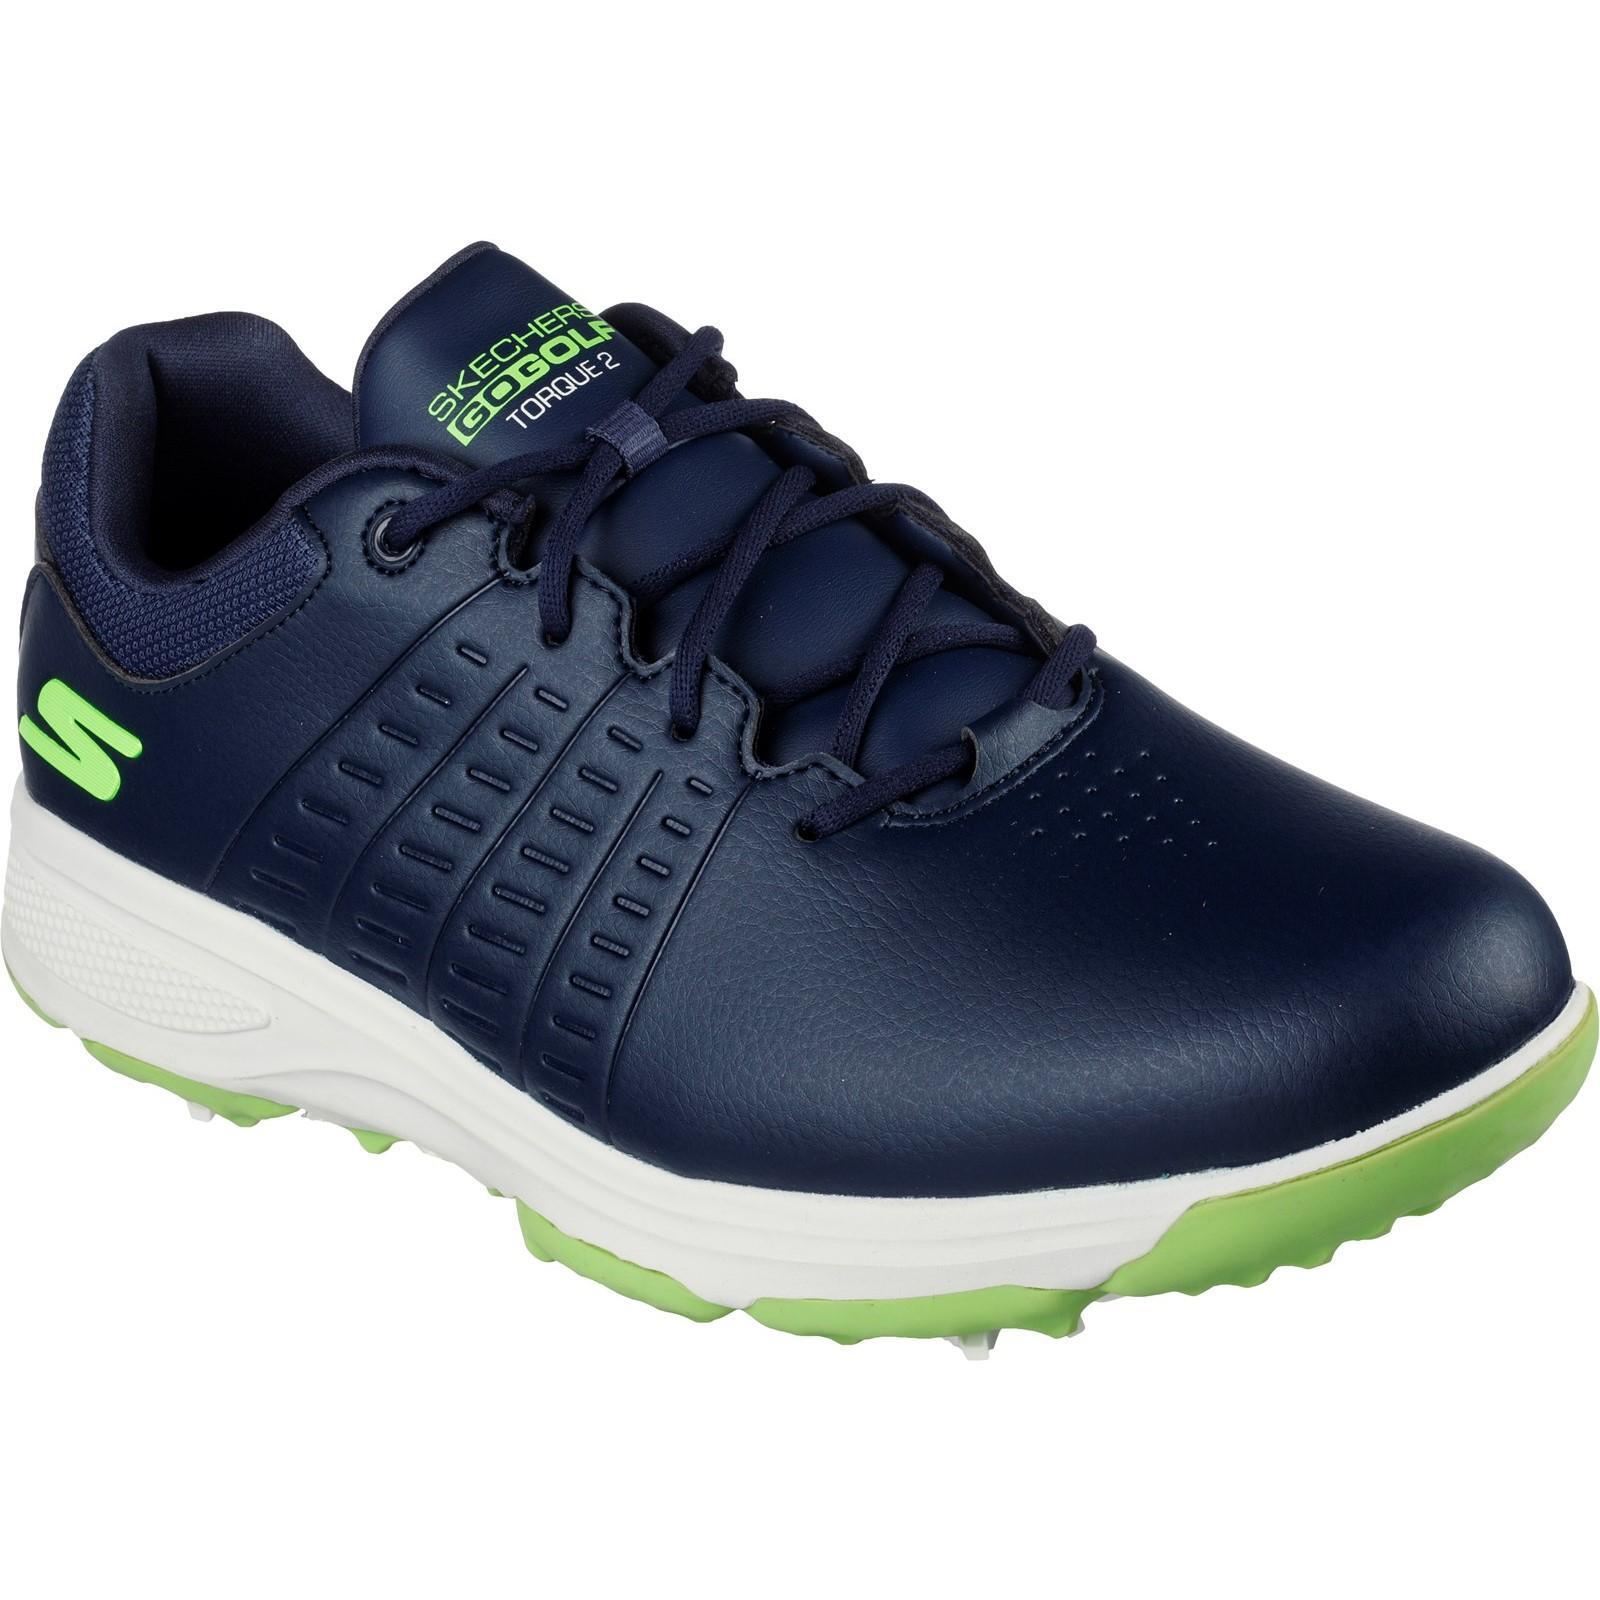 navy blue / lime green